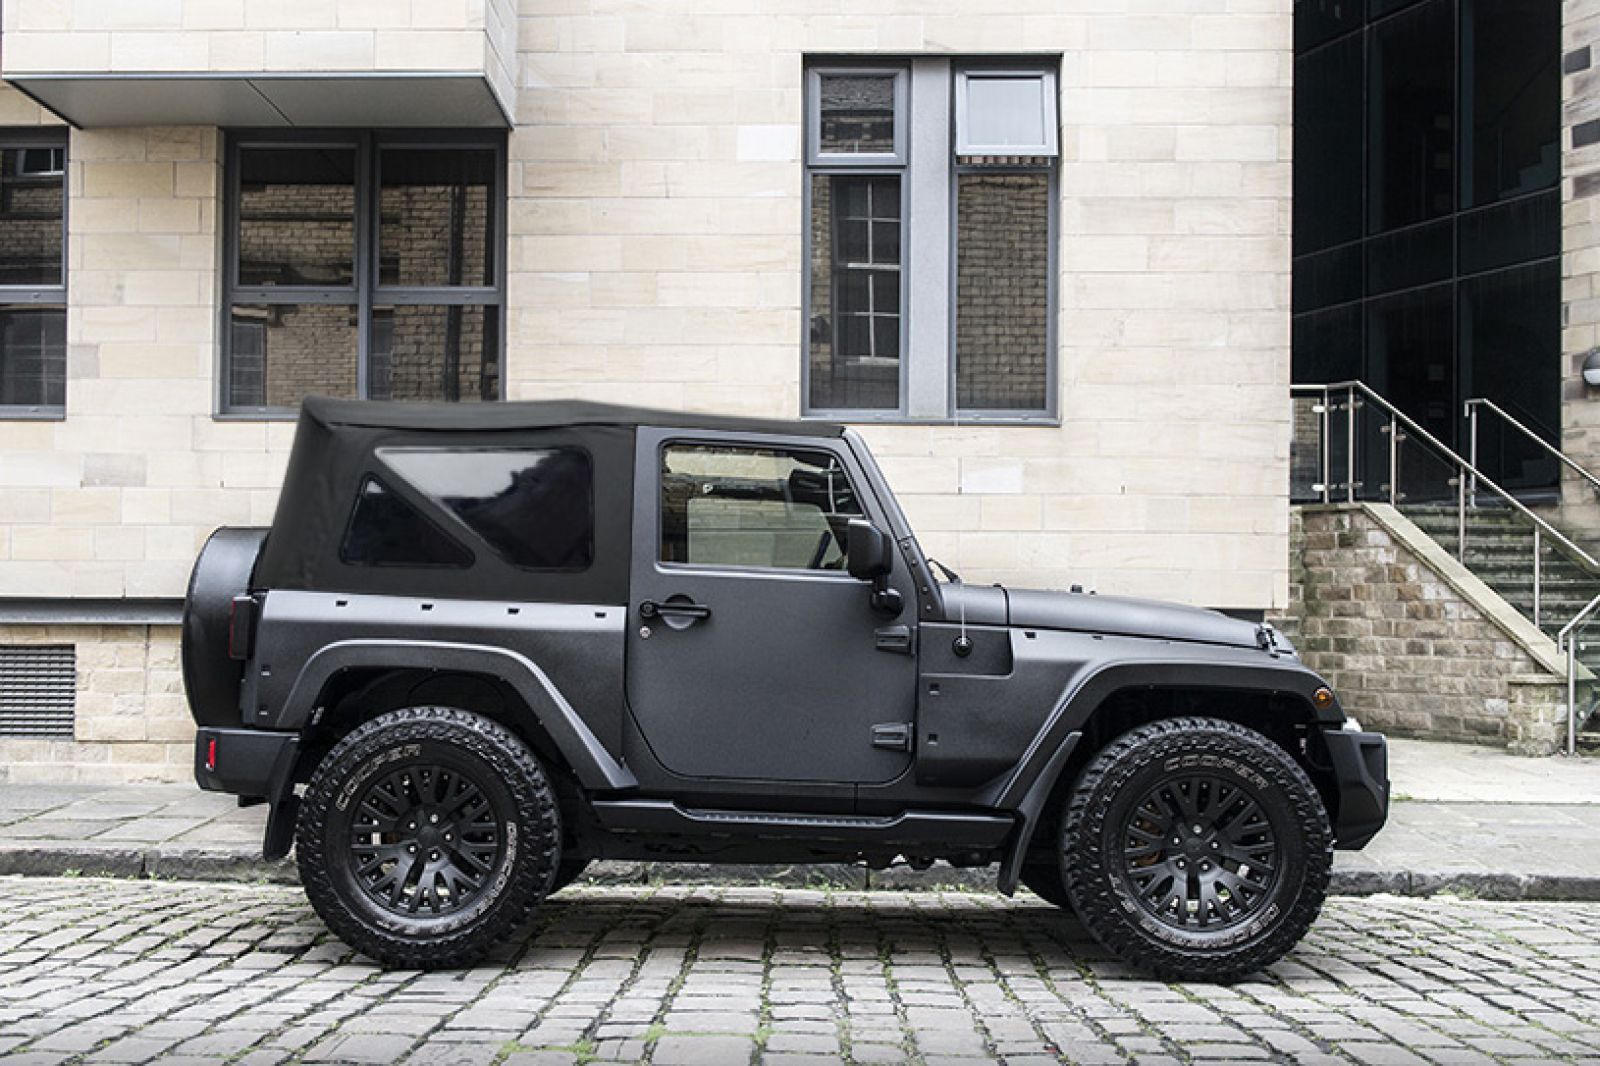 Jeep Wrangler Jk (2007-2018) Soft Top by Chelsea Truck Company - Image 2211